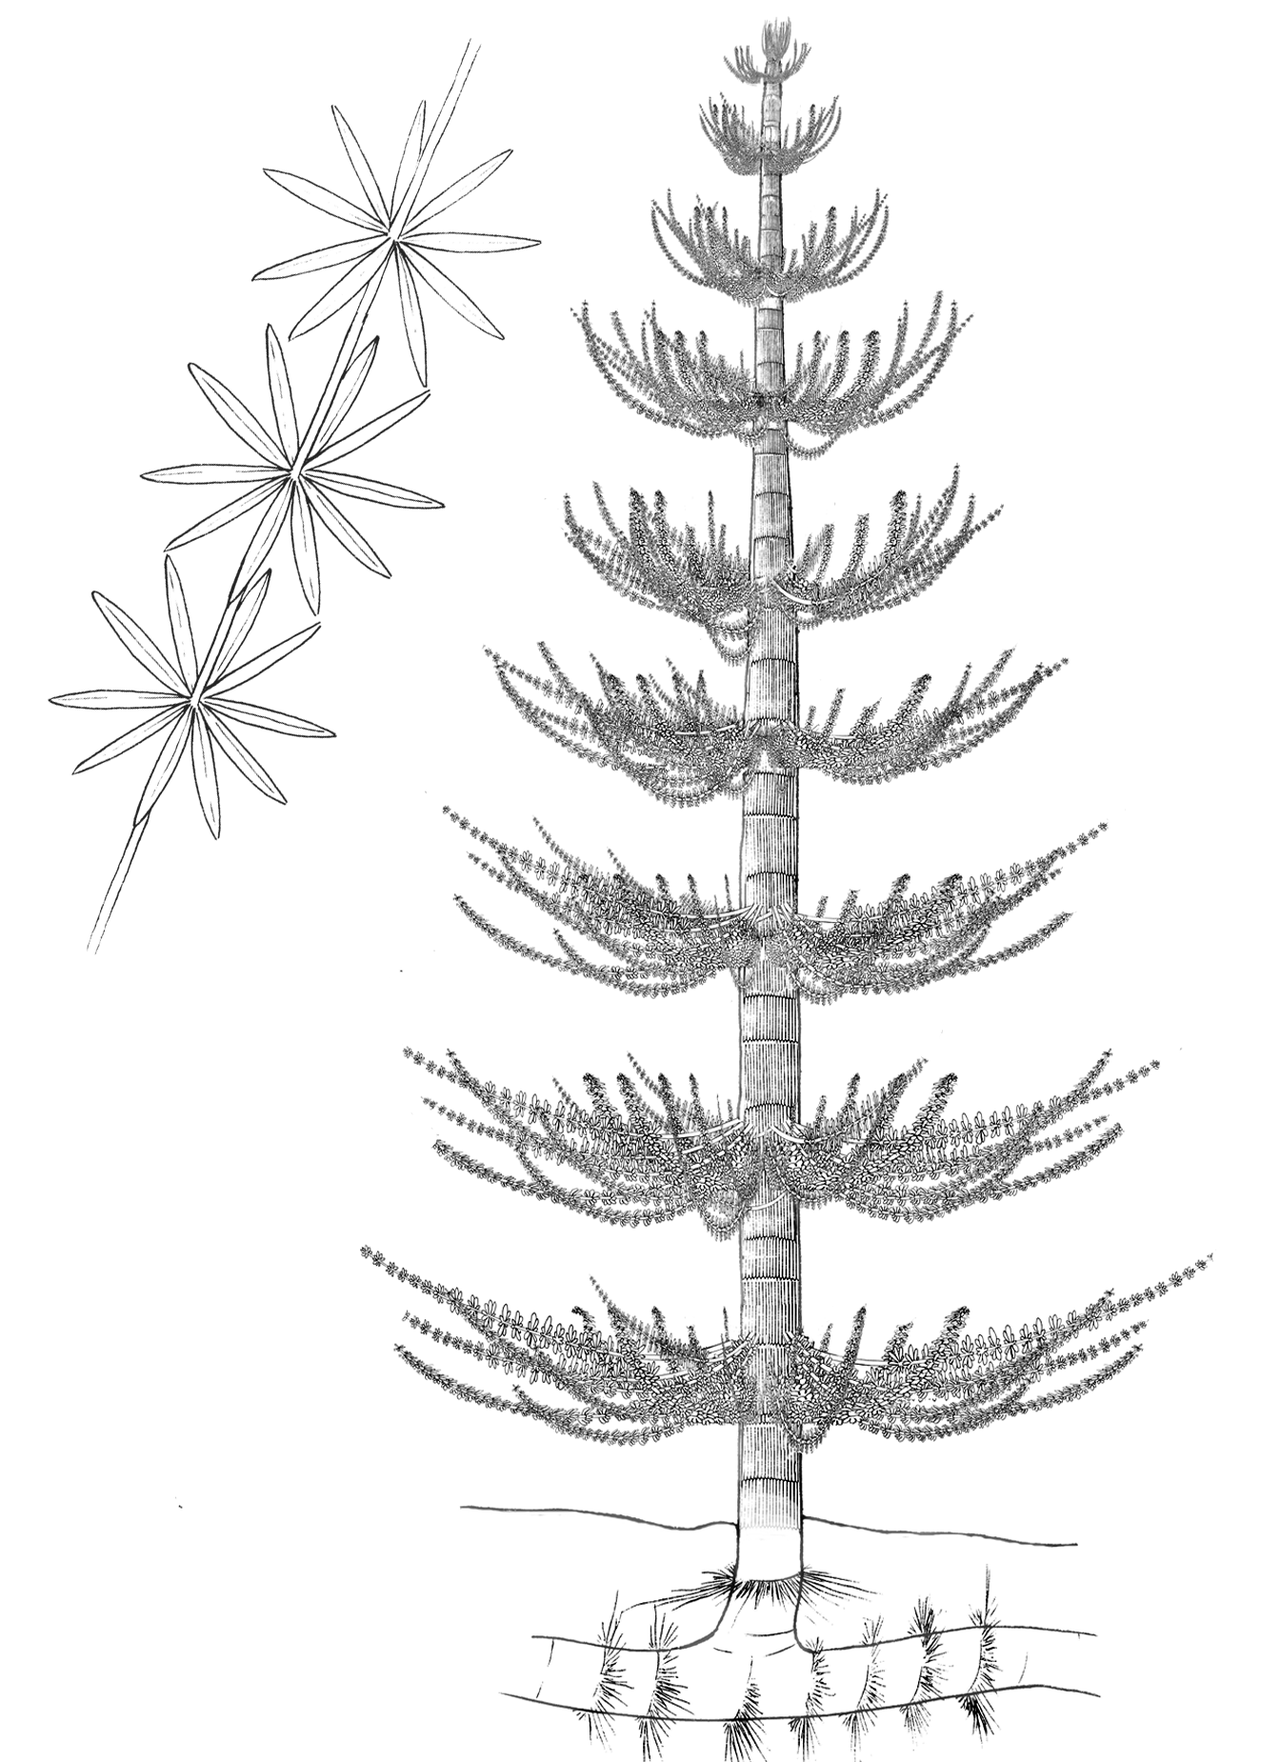 A drawing of a tree-like horsetail, Calamites